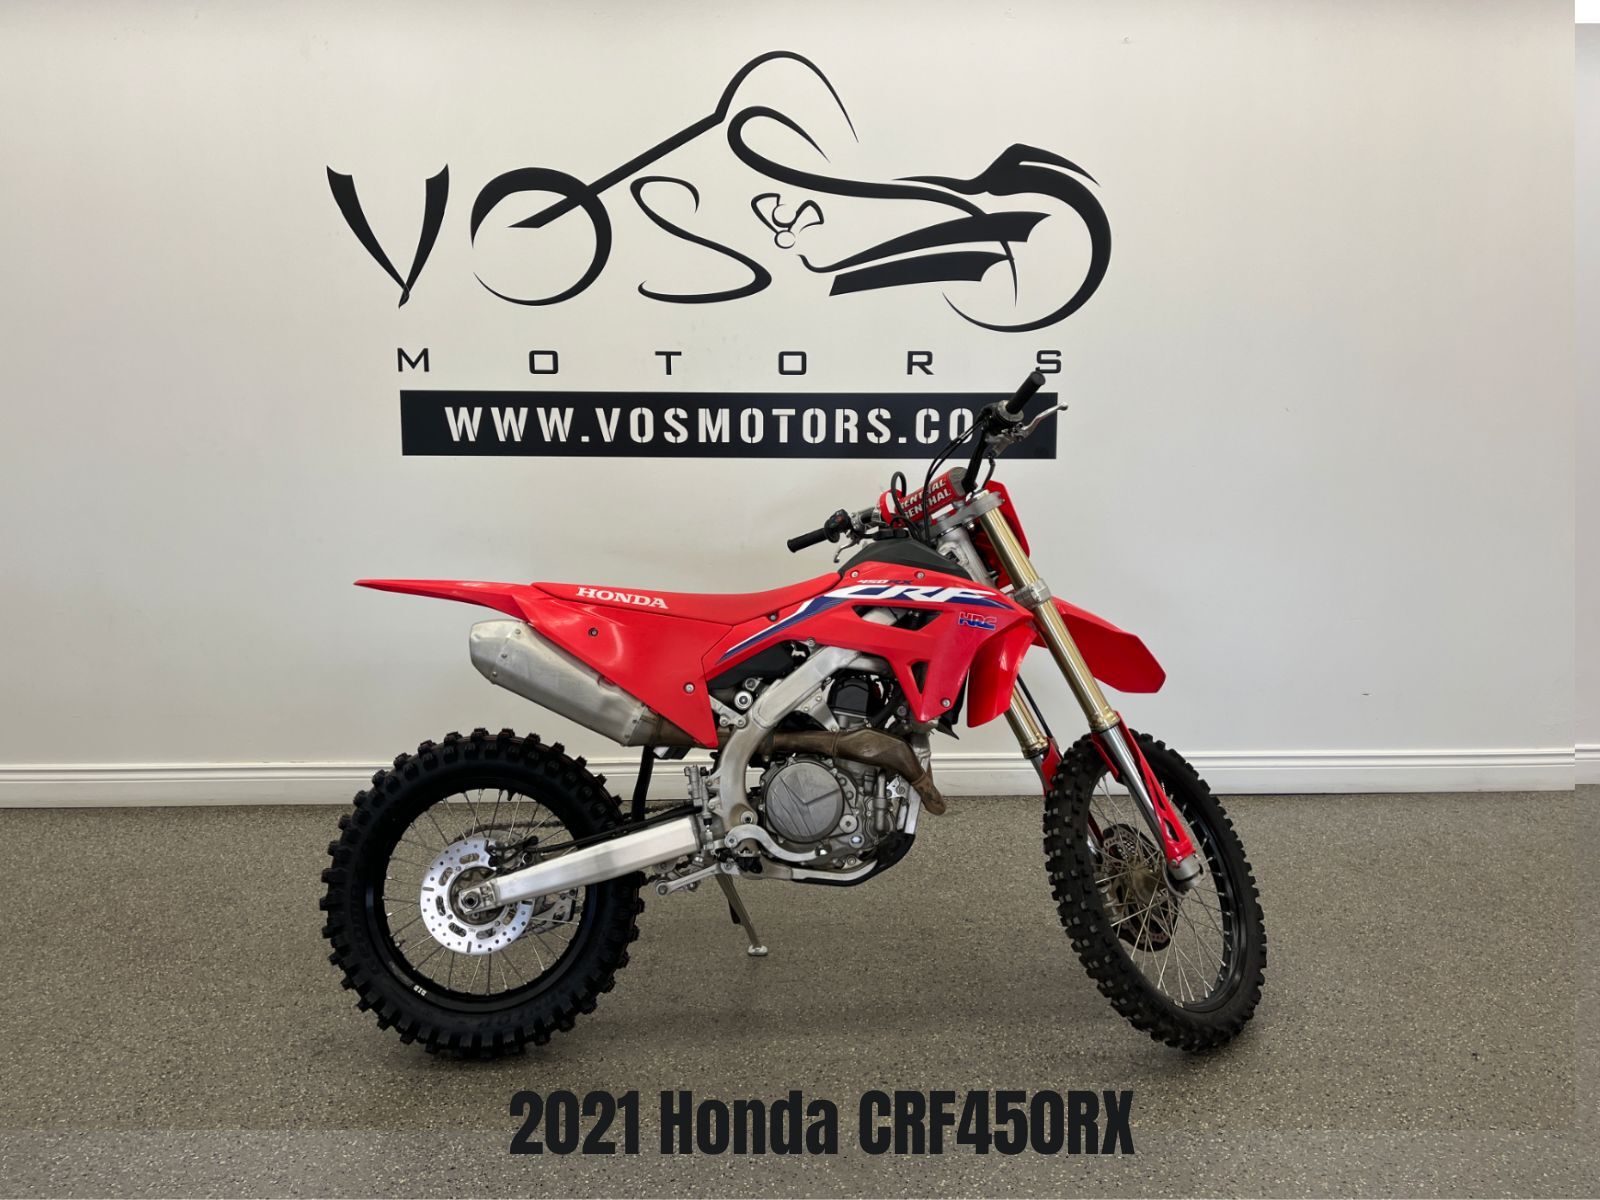 2021 Honda CRF450RX CRF450RX - V4873NP - -No Payments for 1 Year**